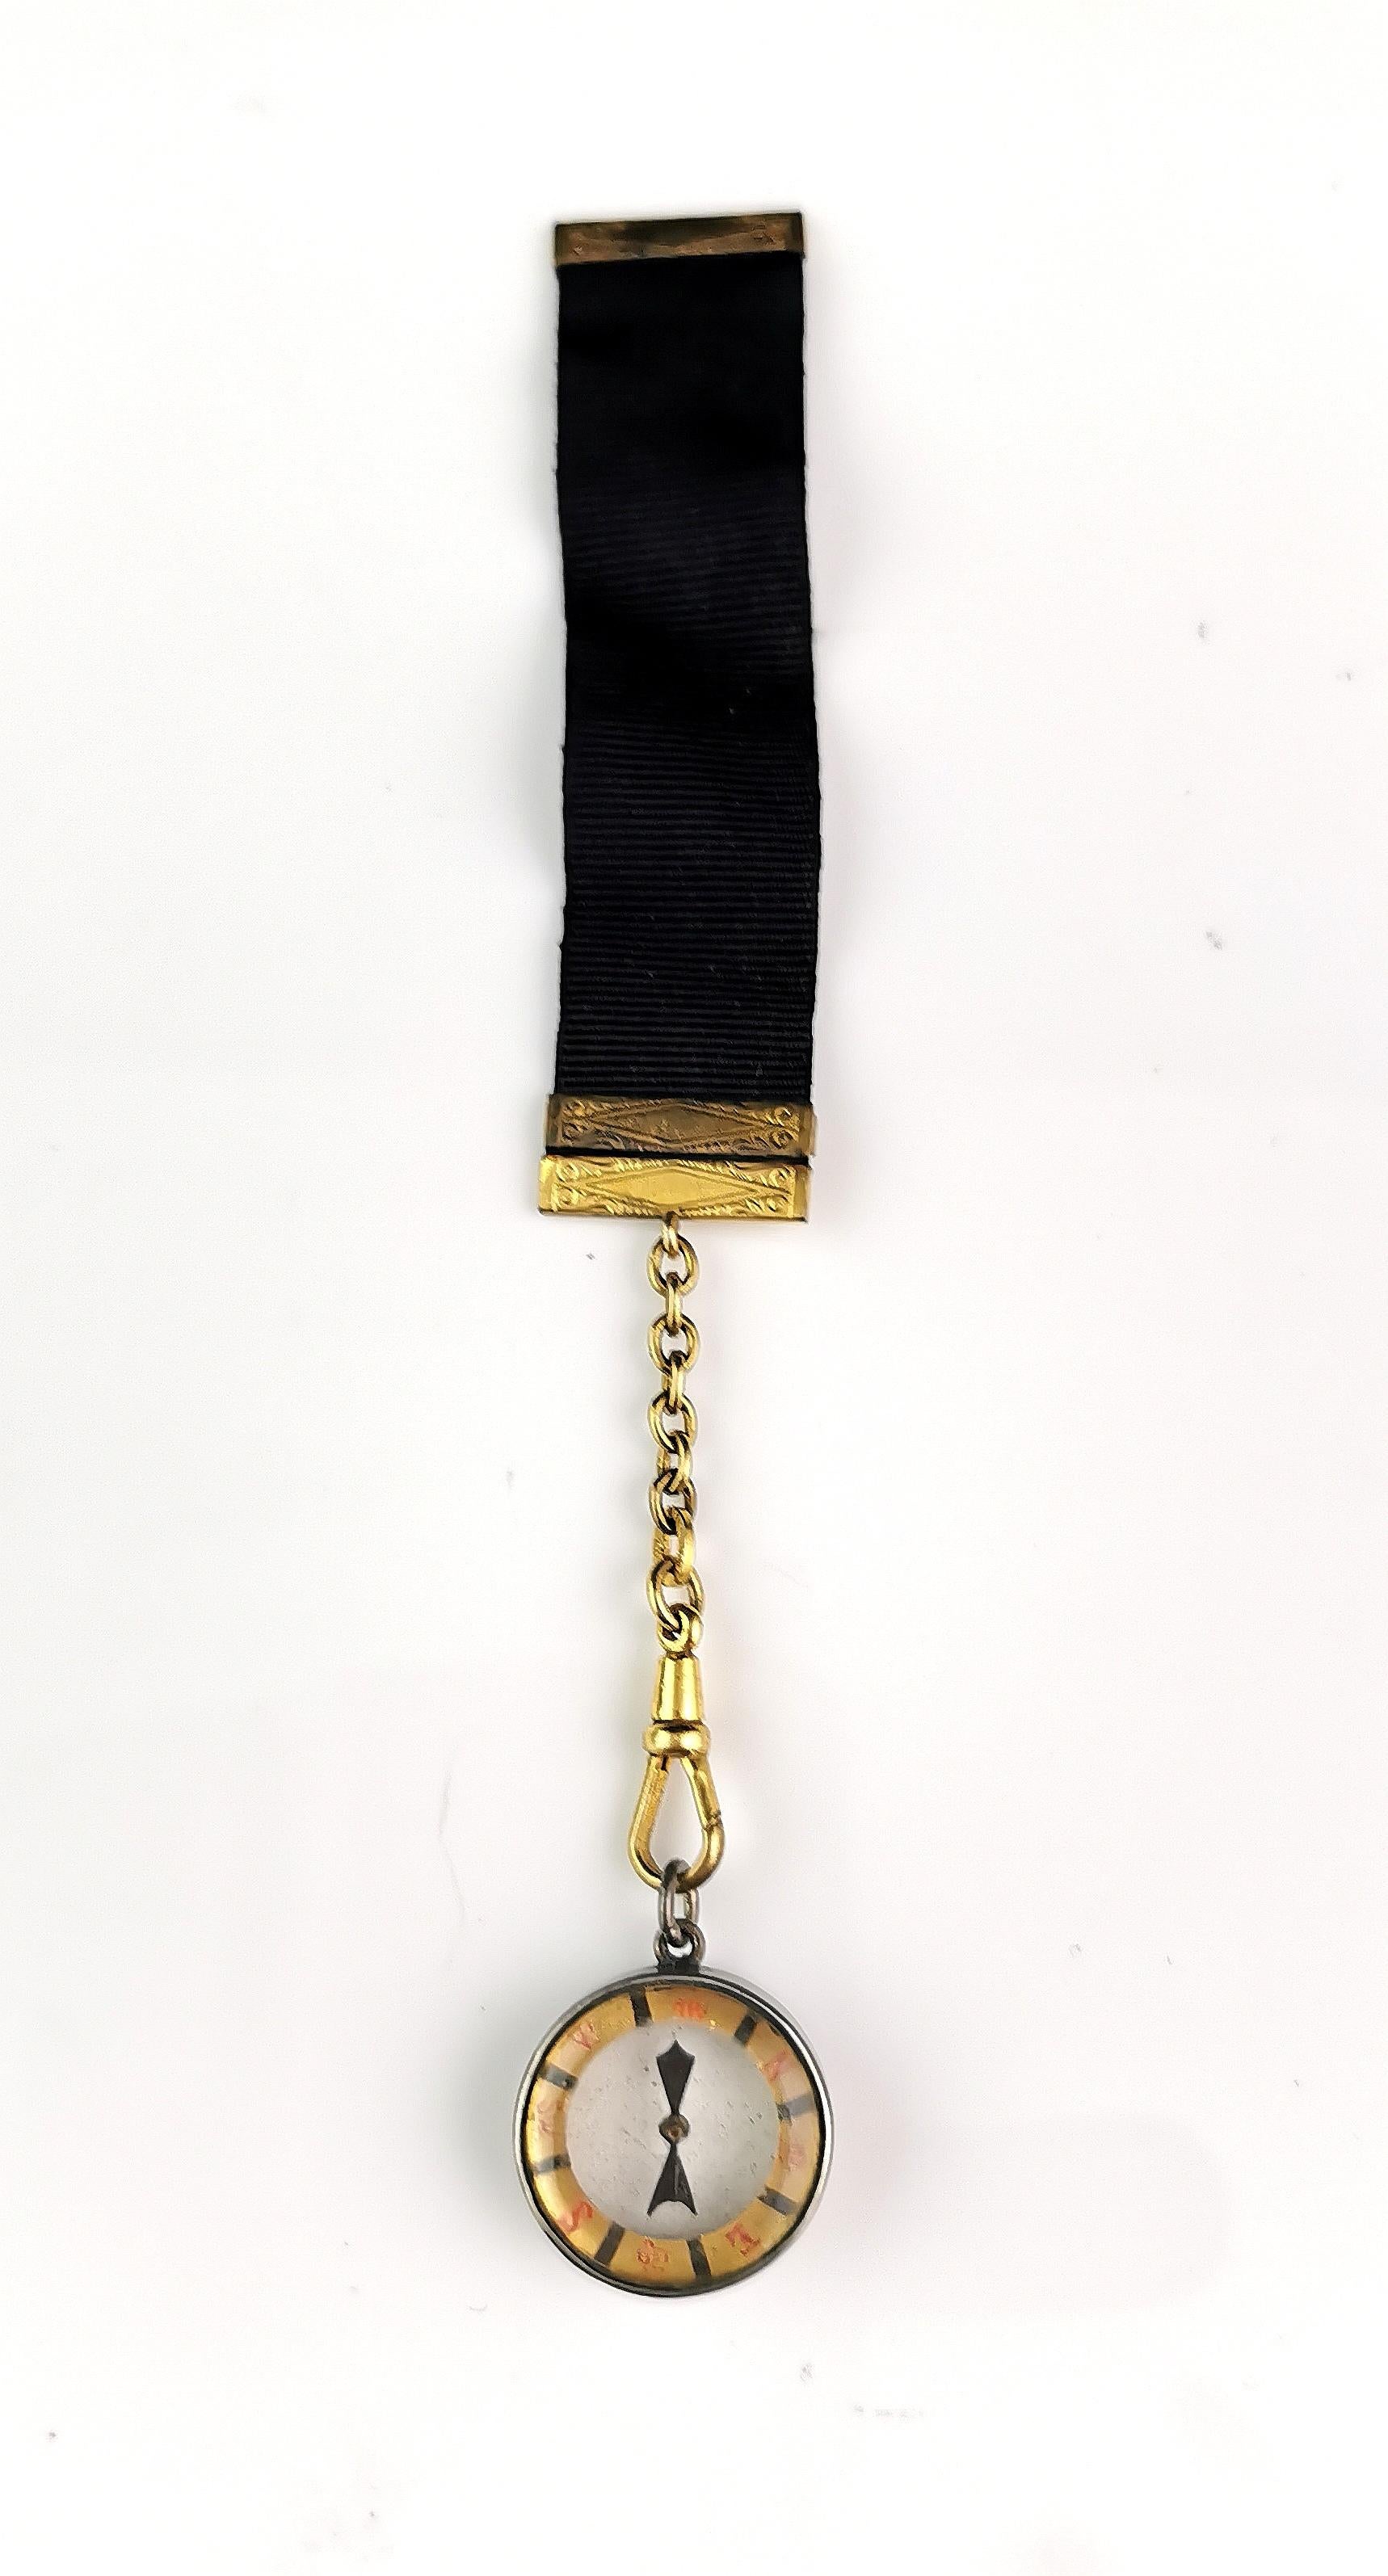 A lovely antique Victorian era black silk ribbon fob with a gilt compass.

The long black silk fob is sleek with rich gilt end caps and a chain length suspended from the bottom.

There is a small gilt metal compass attached to the chain length by a